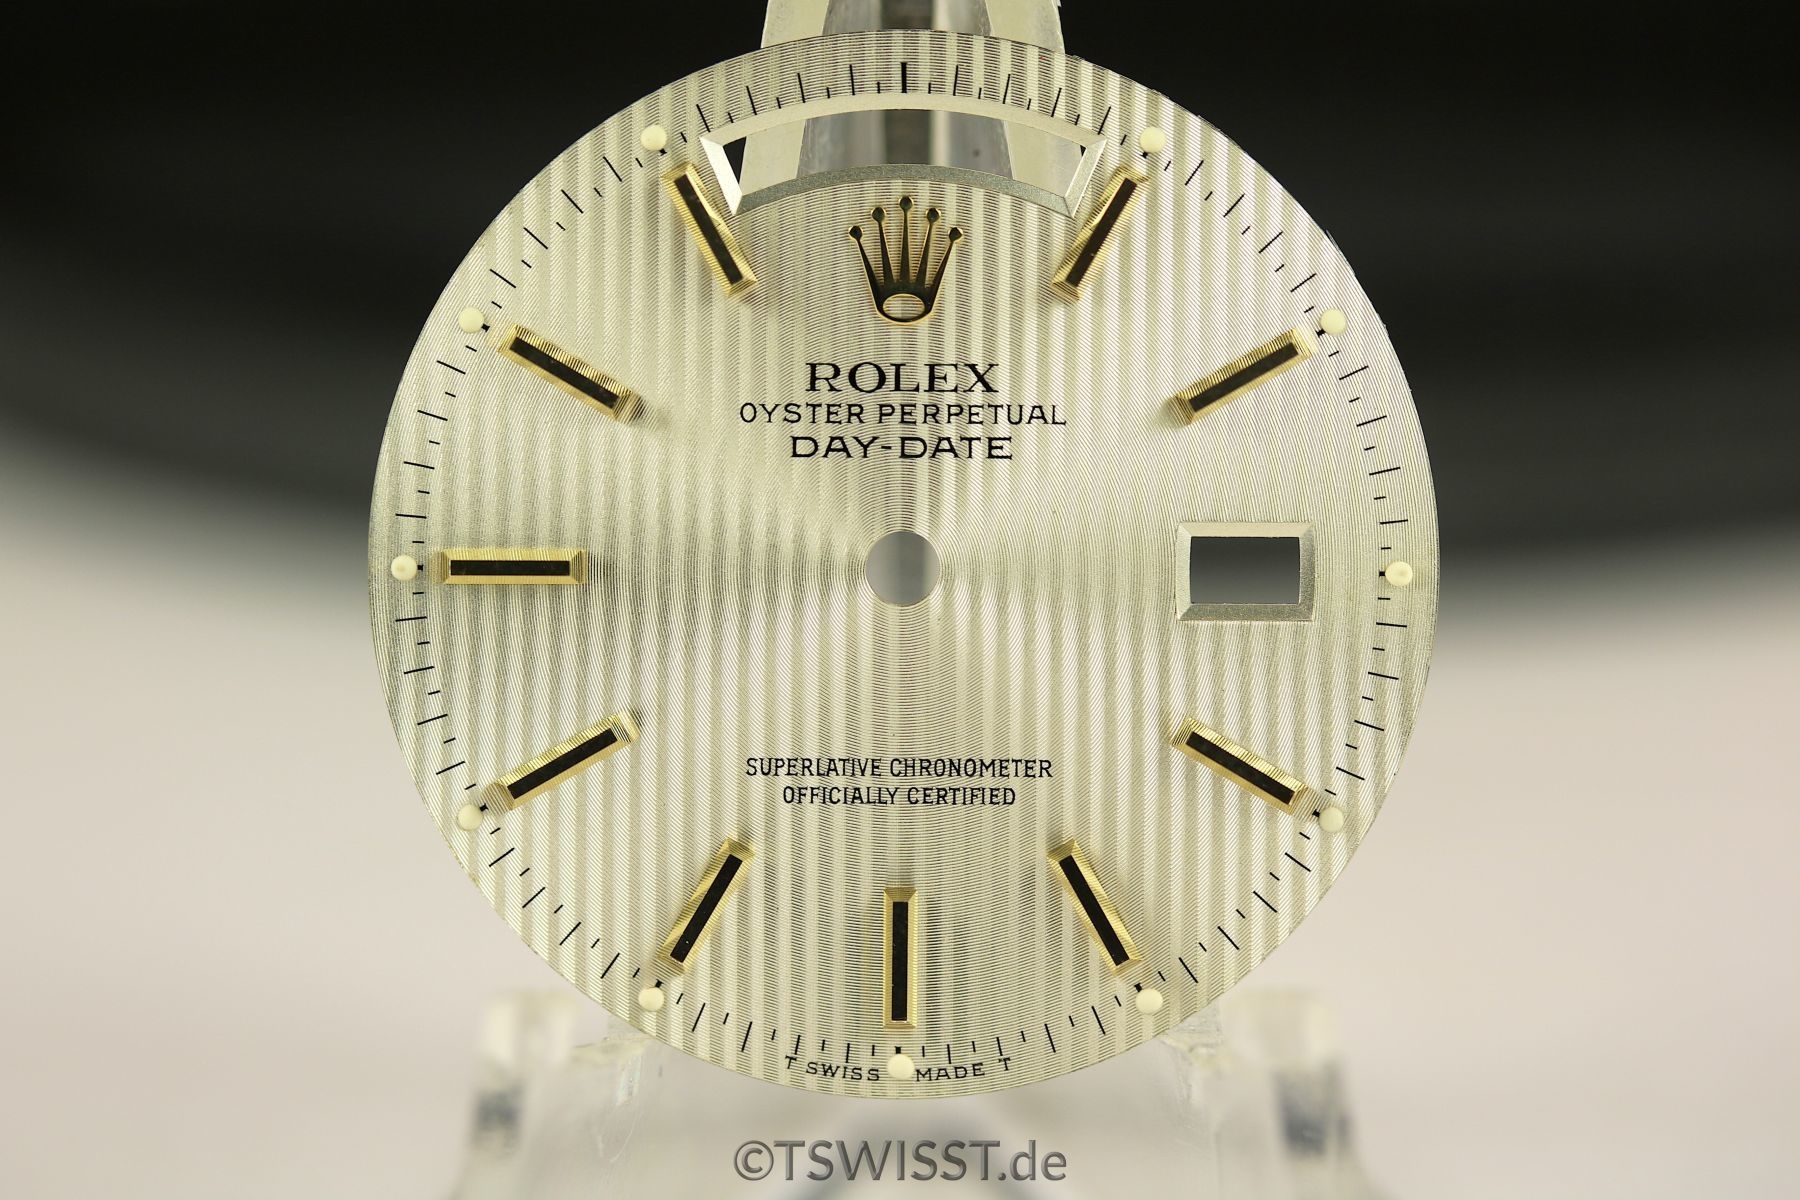 Rolex Day-date dial